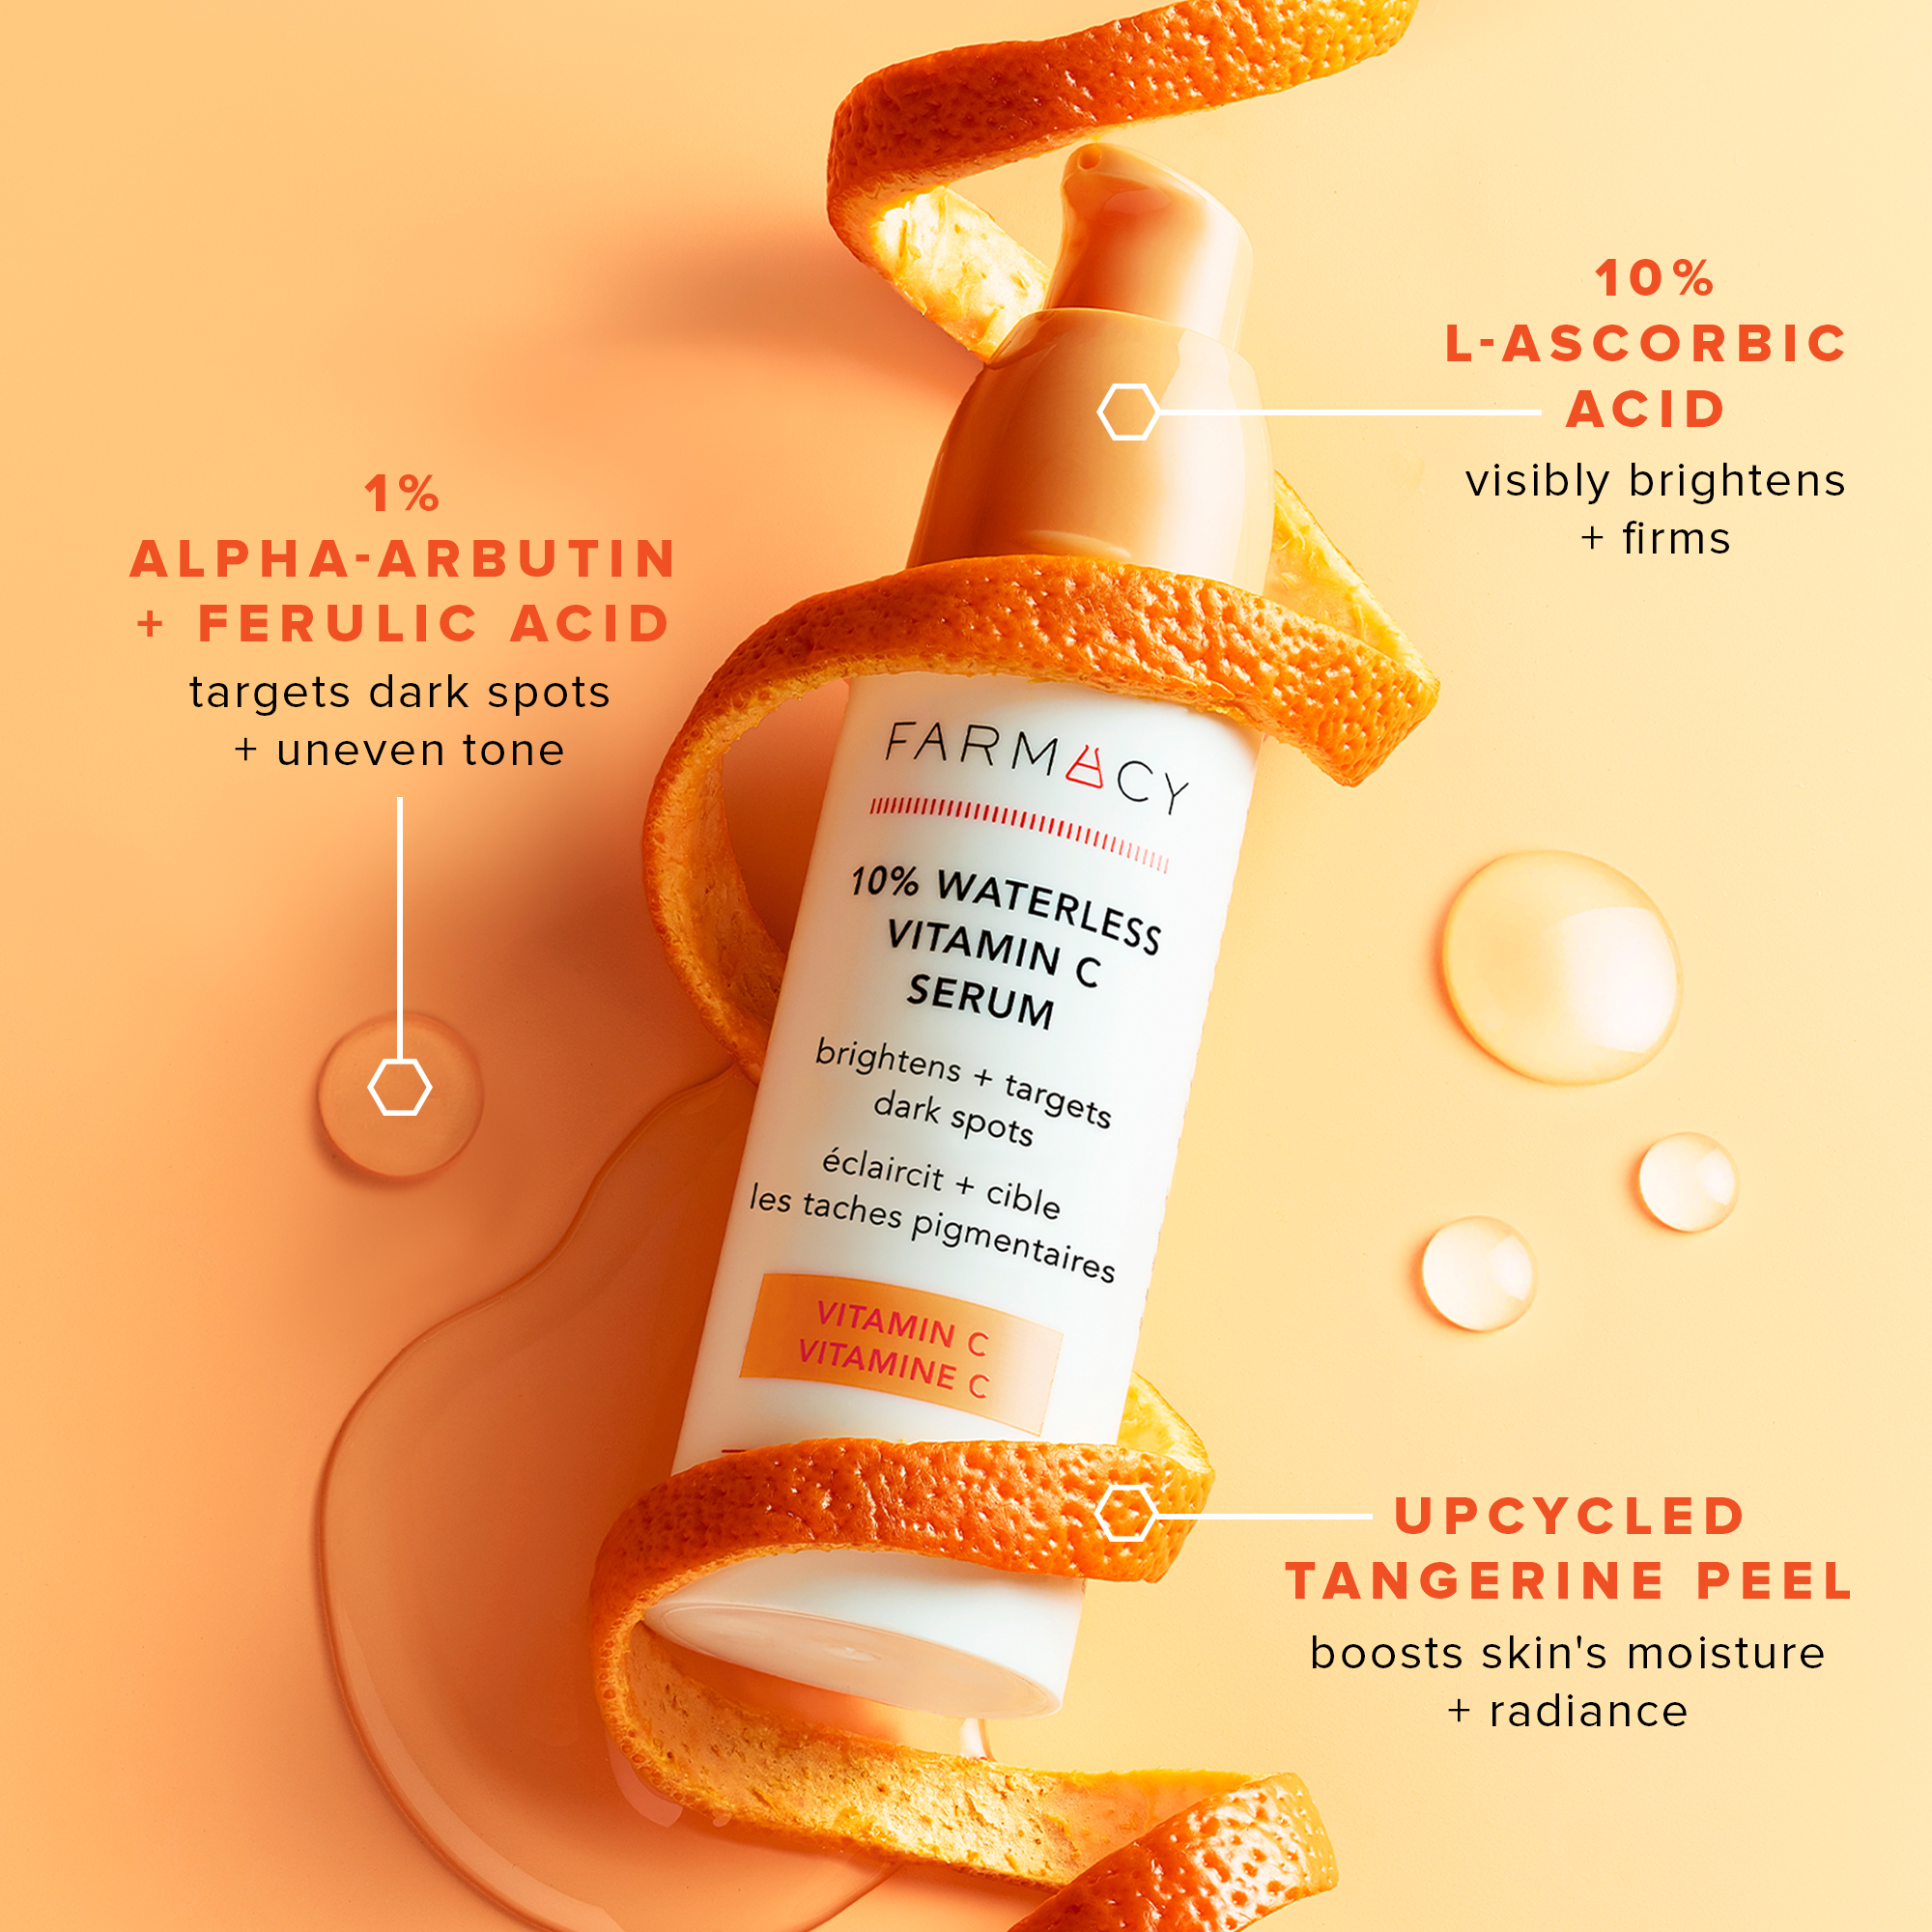 1% alpha-arbutin and ferulic acid, targets dark spots and uneven skin tone, 10% ;-ascorbic acid visibly brightens and firms, upcycled tangerine peel boosts skin's moisture and radiance